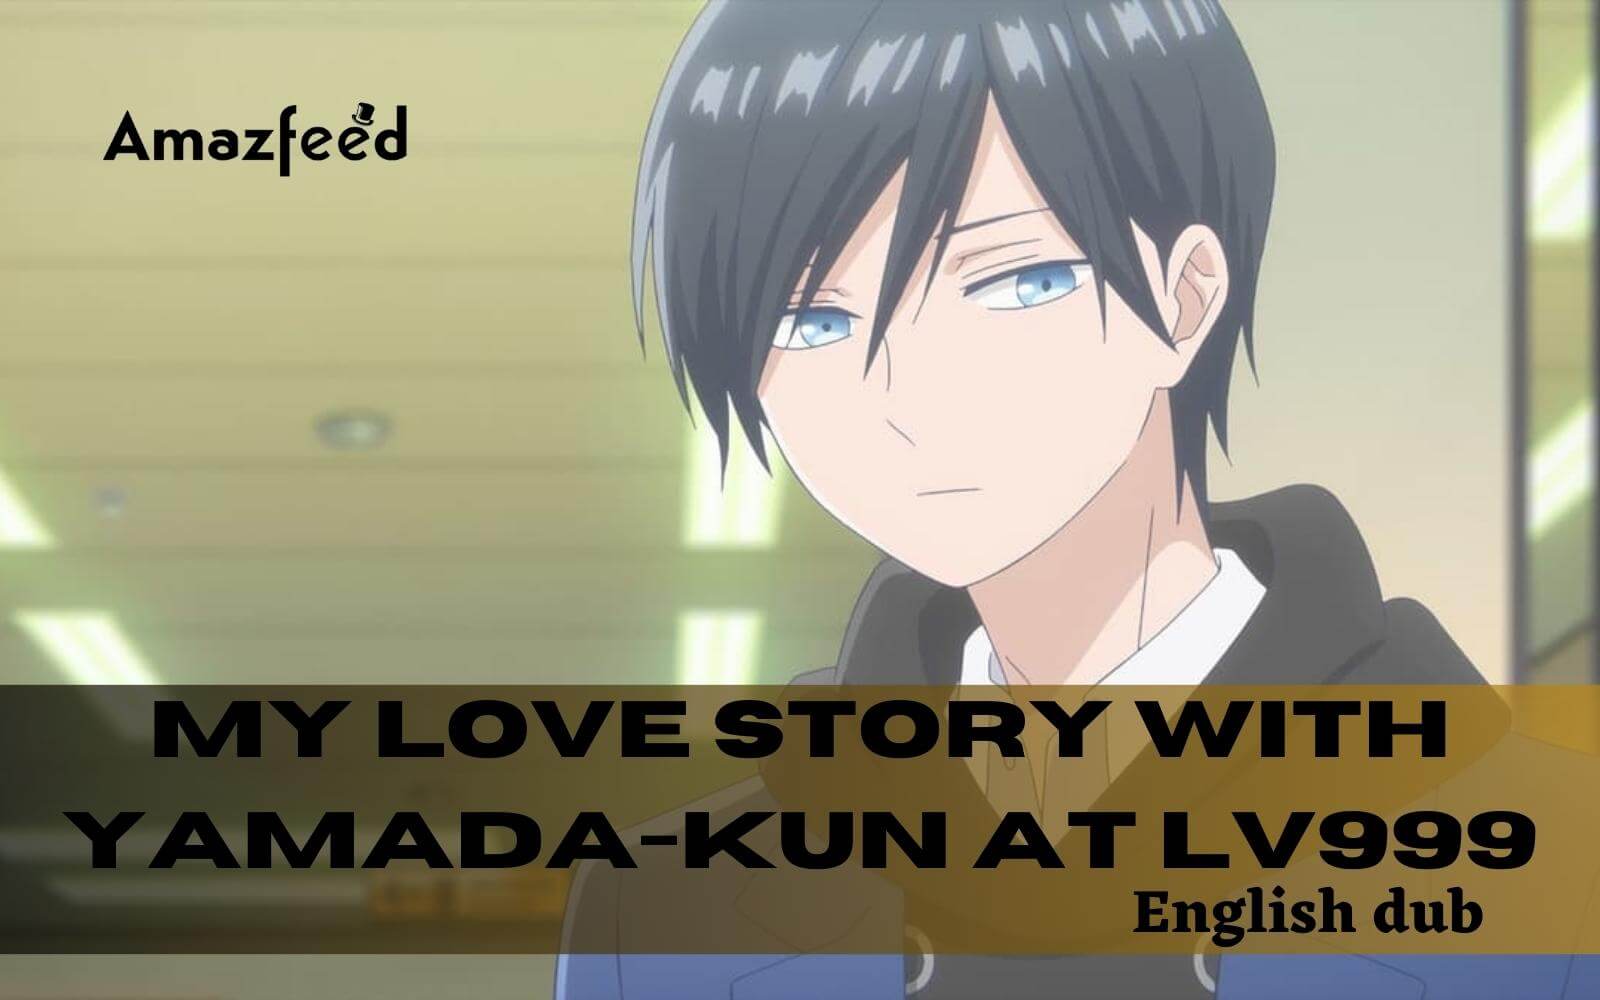 My Love Story with Yamada-kun at Lv999 English dub cast announced